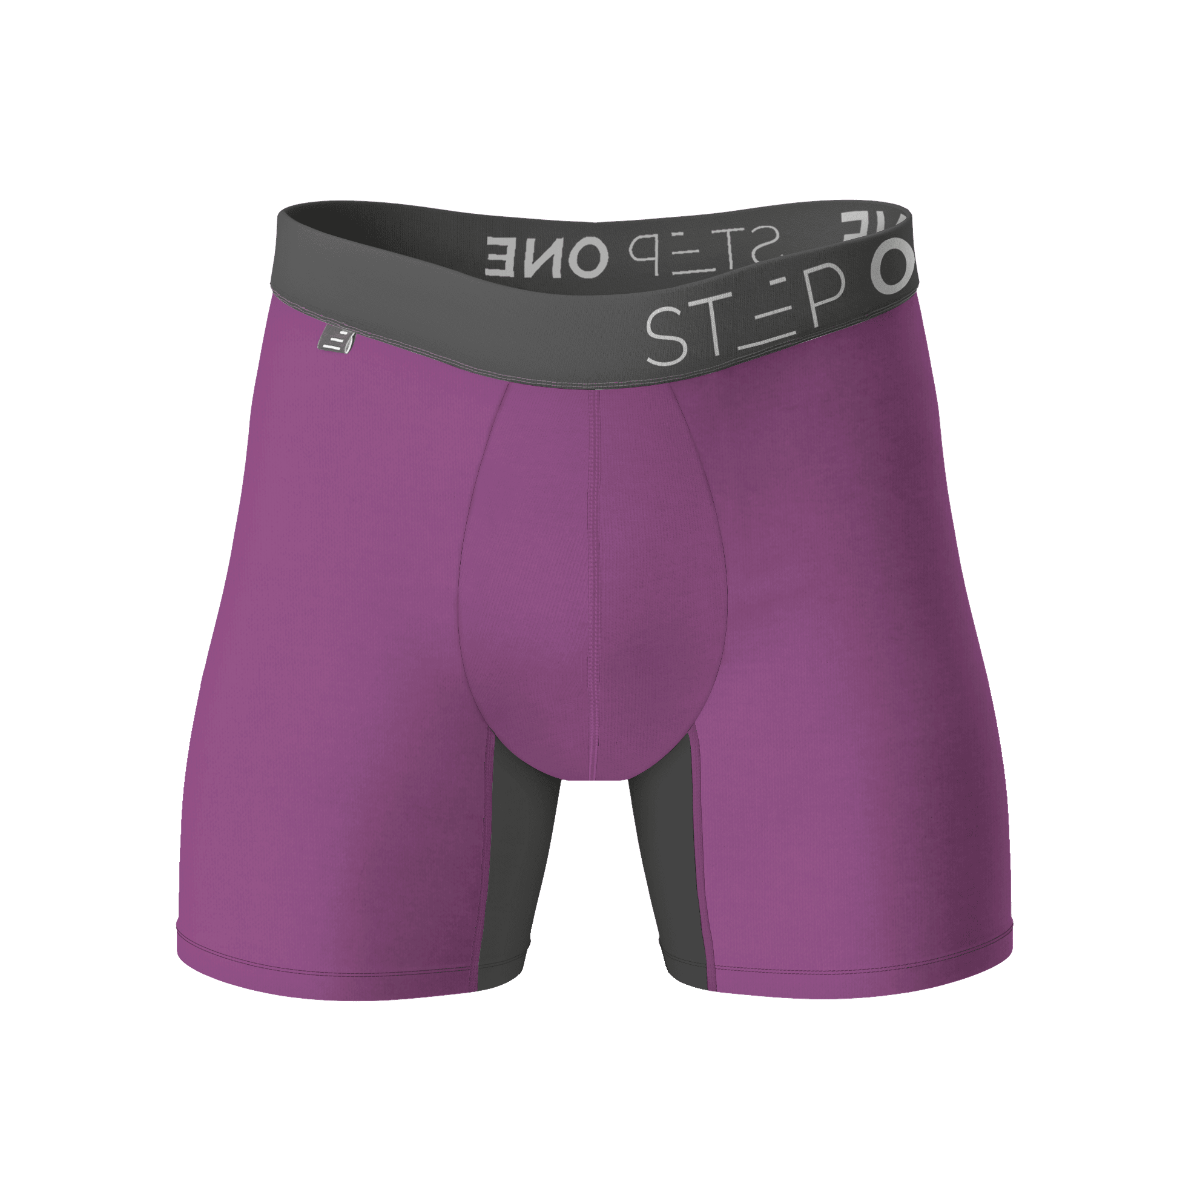 Boxer Brief - Juicy Plums product